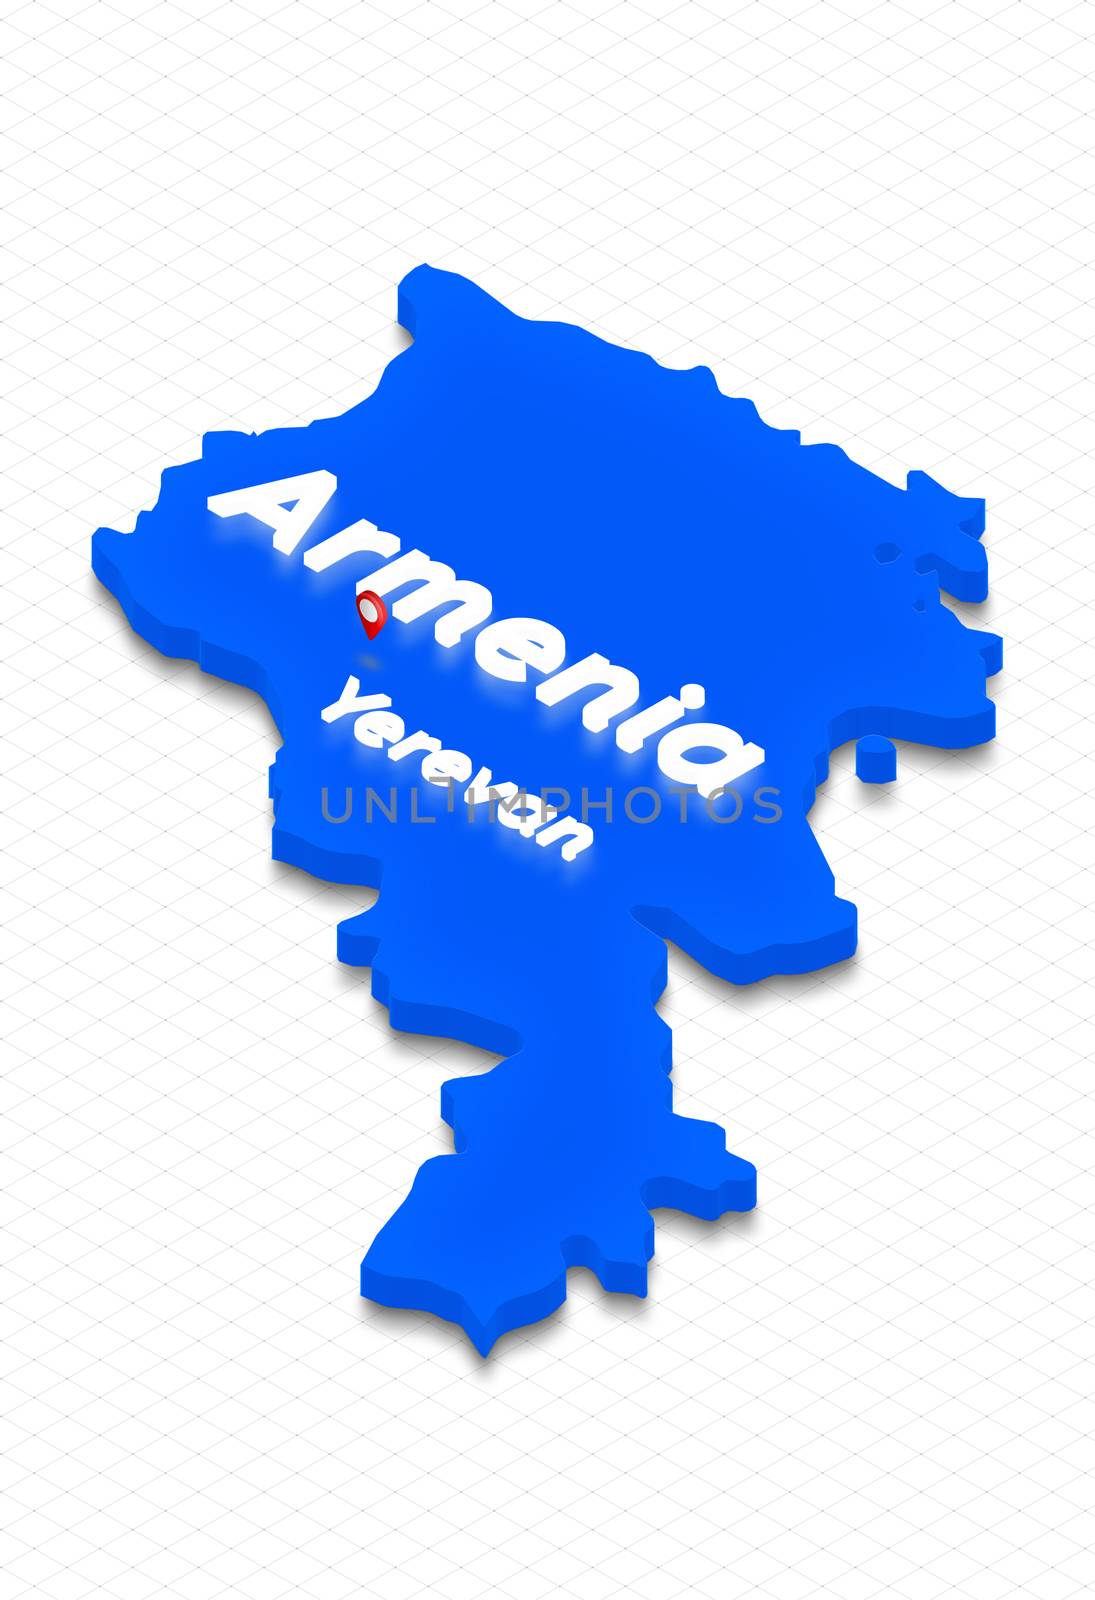 Illustration of a blue ground map of Armenia on grid background. Left 3D isometric perspective projection with the lighting name of country and capital Yerevan.